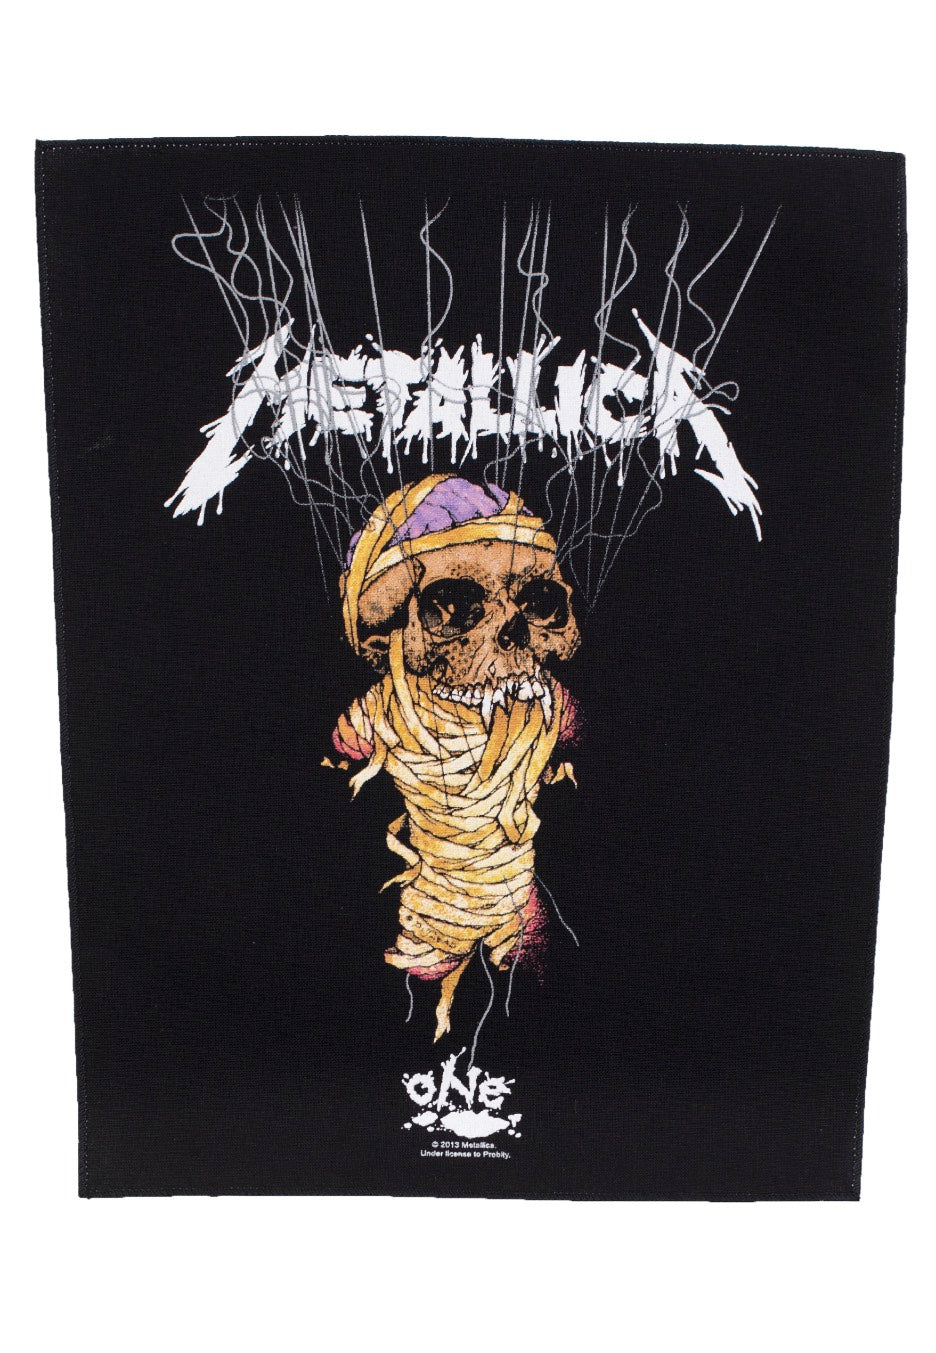 Metallica - One Strings - Backpatch